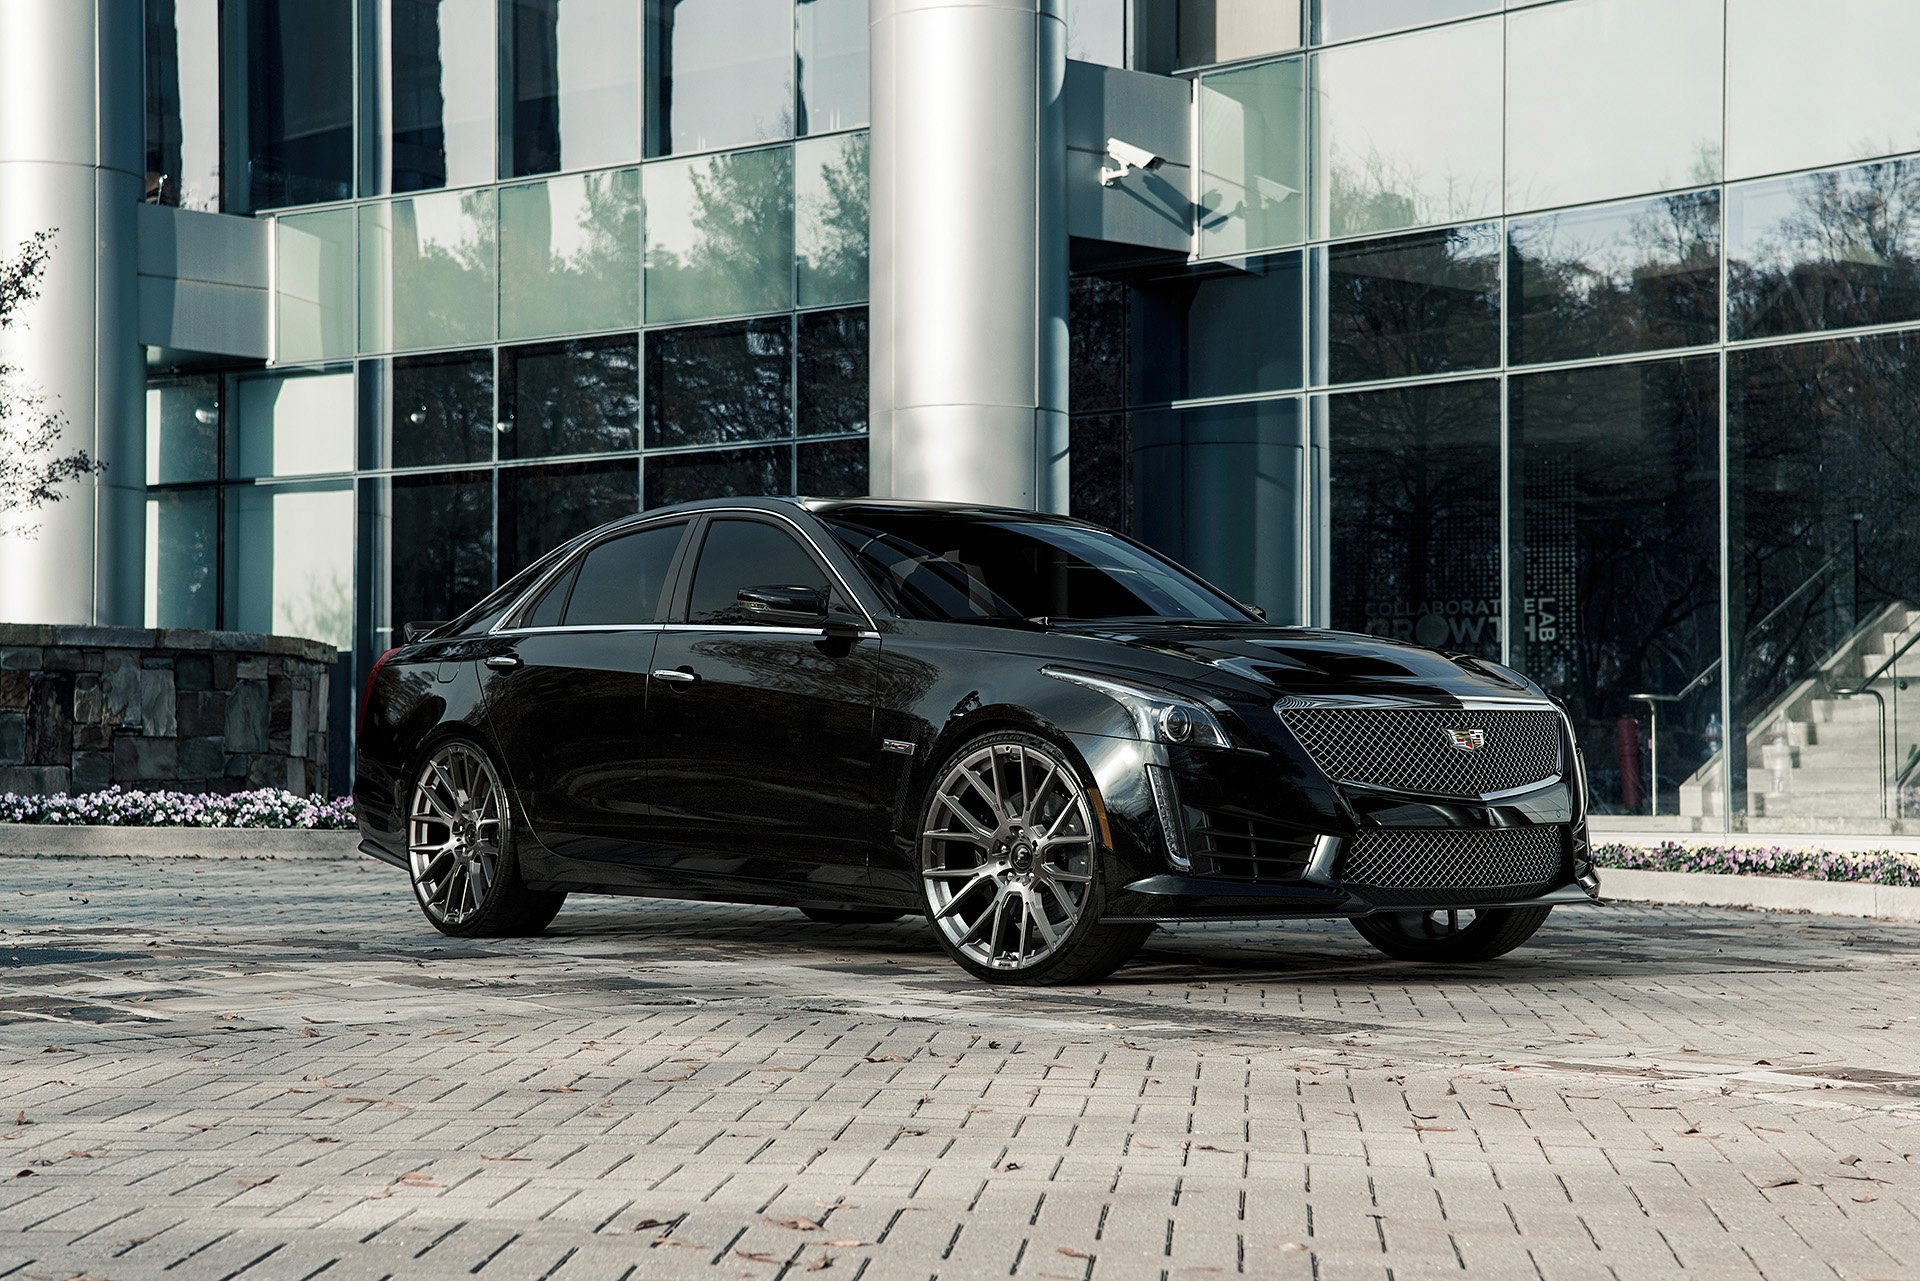 Chrome Mesh Grille on Black Cadillac CTS - Photo by Forgiato